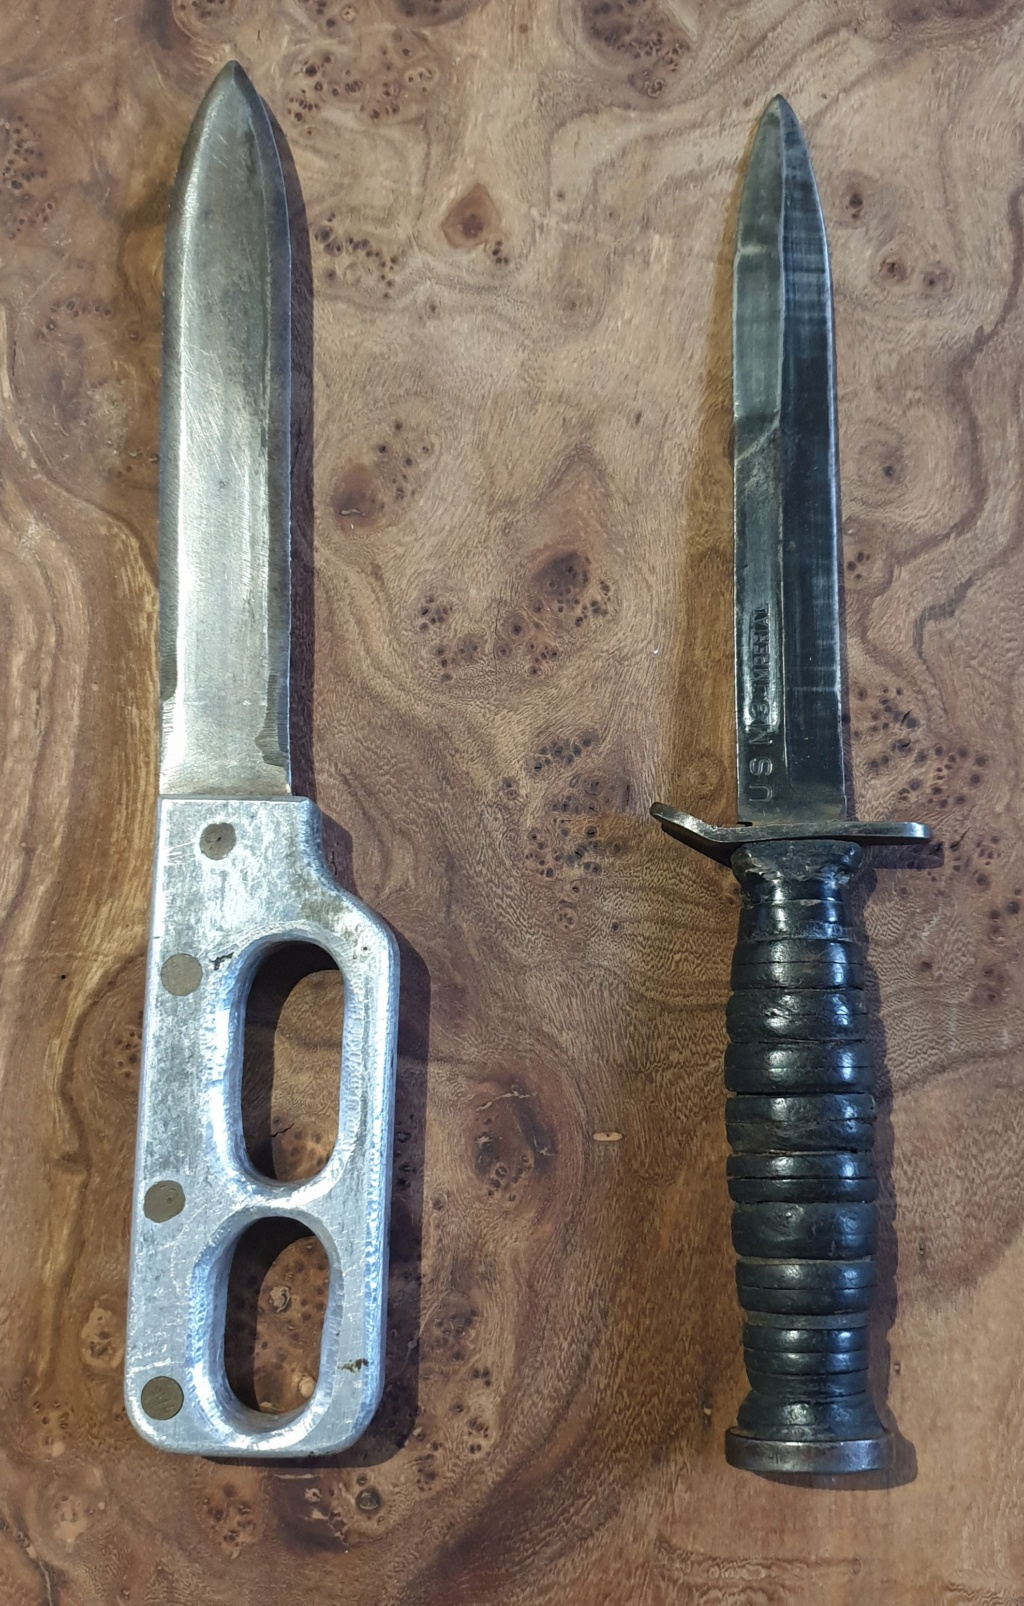 Trench knife "theater made" 20240145